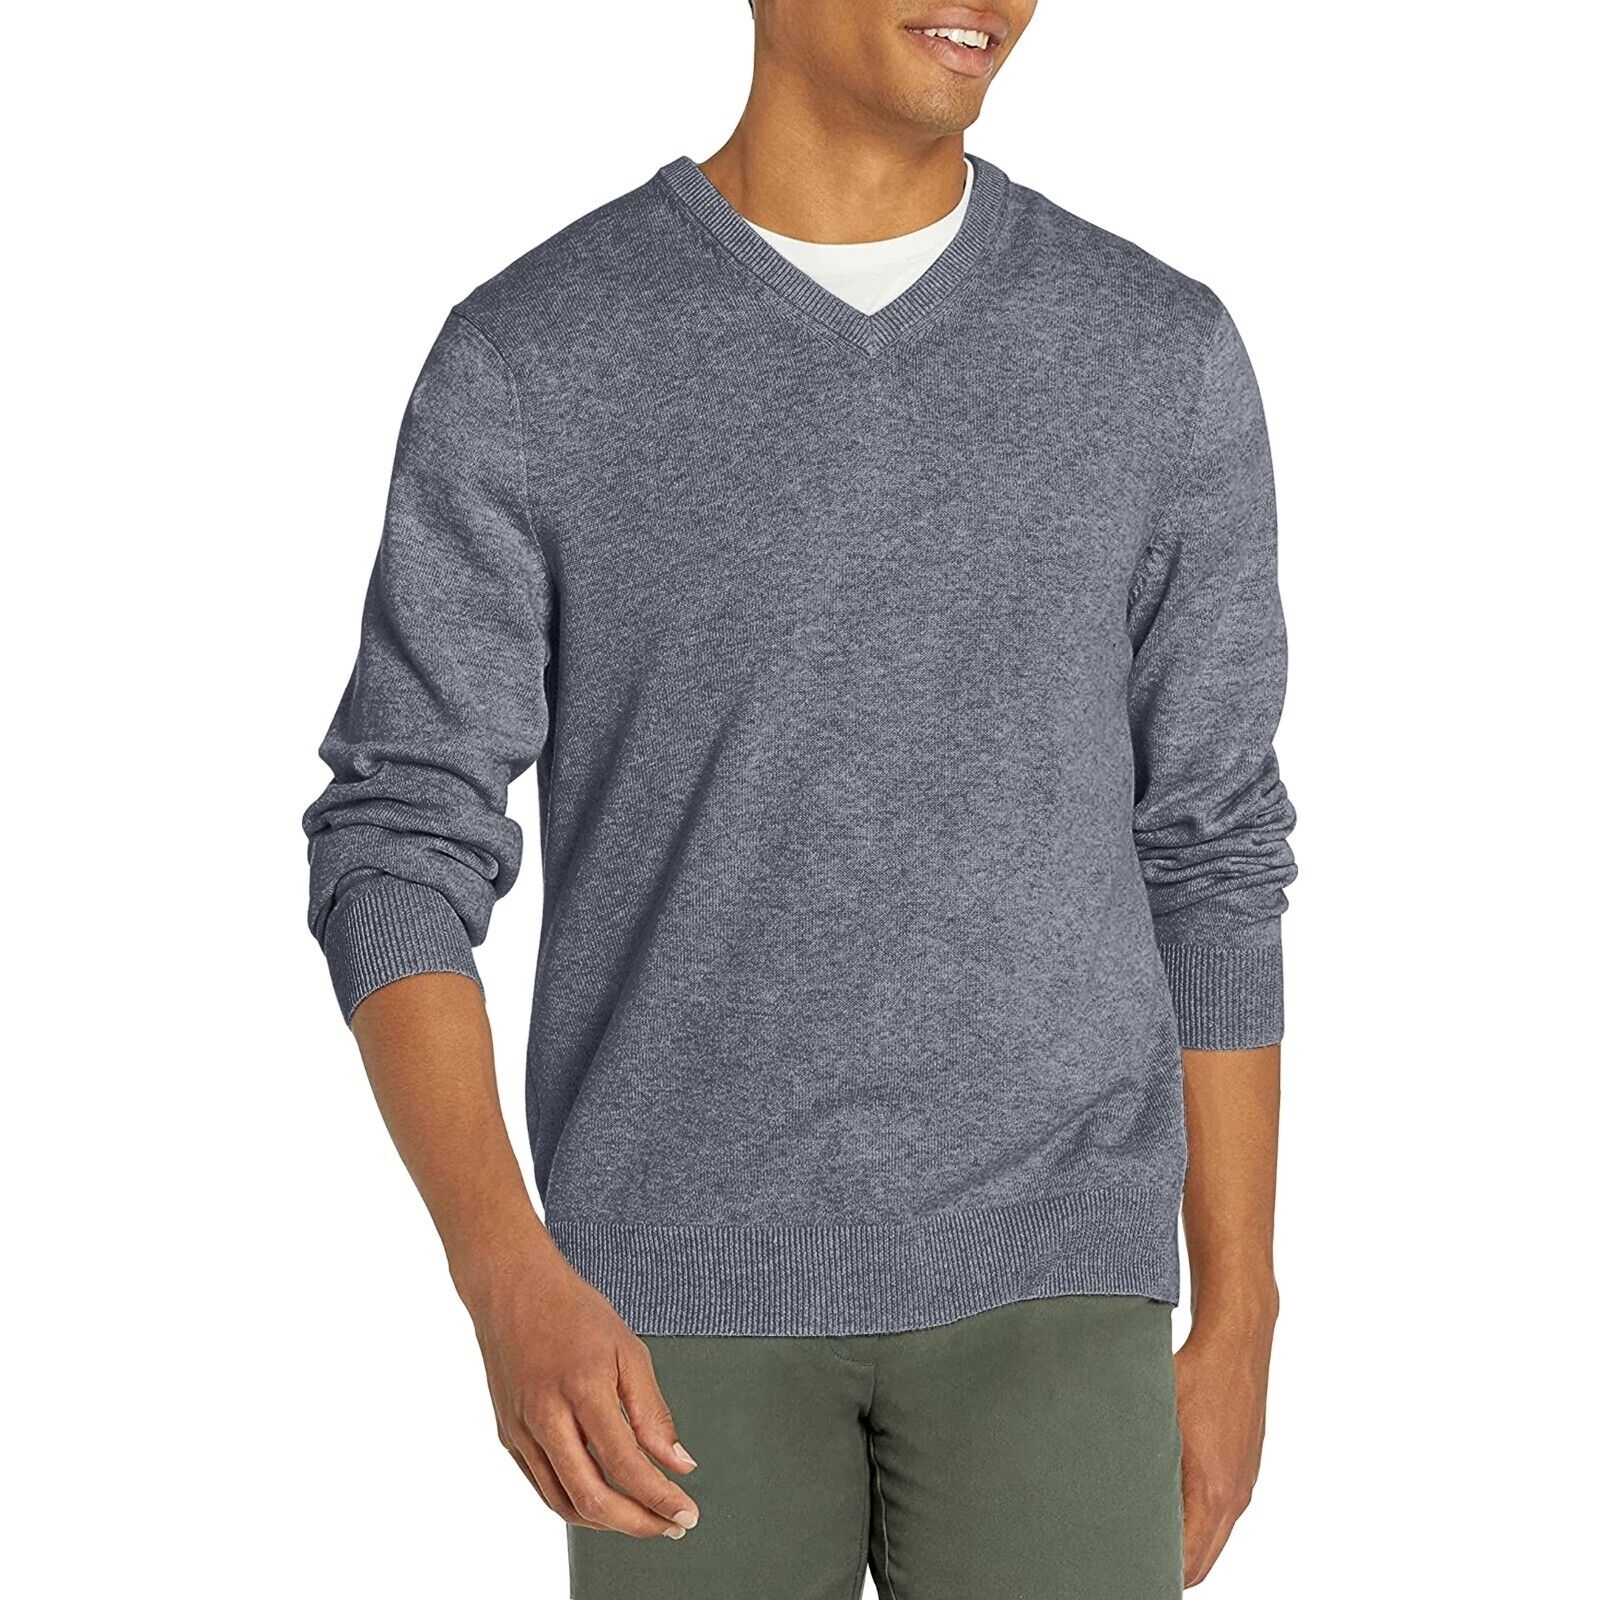 Men's Casual Ultra-Soft Slim Fit Warm Knit Pullover V-Neck Sweater For Winter - Grey, Large